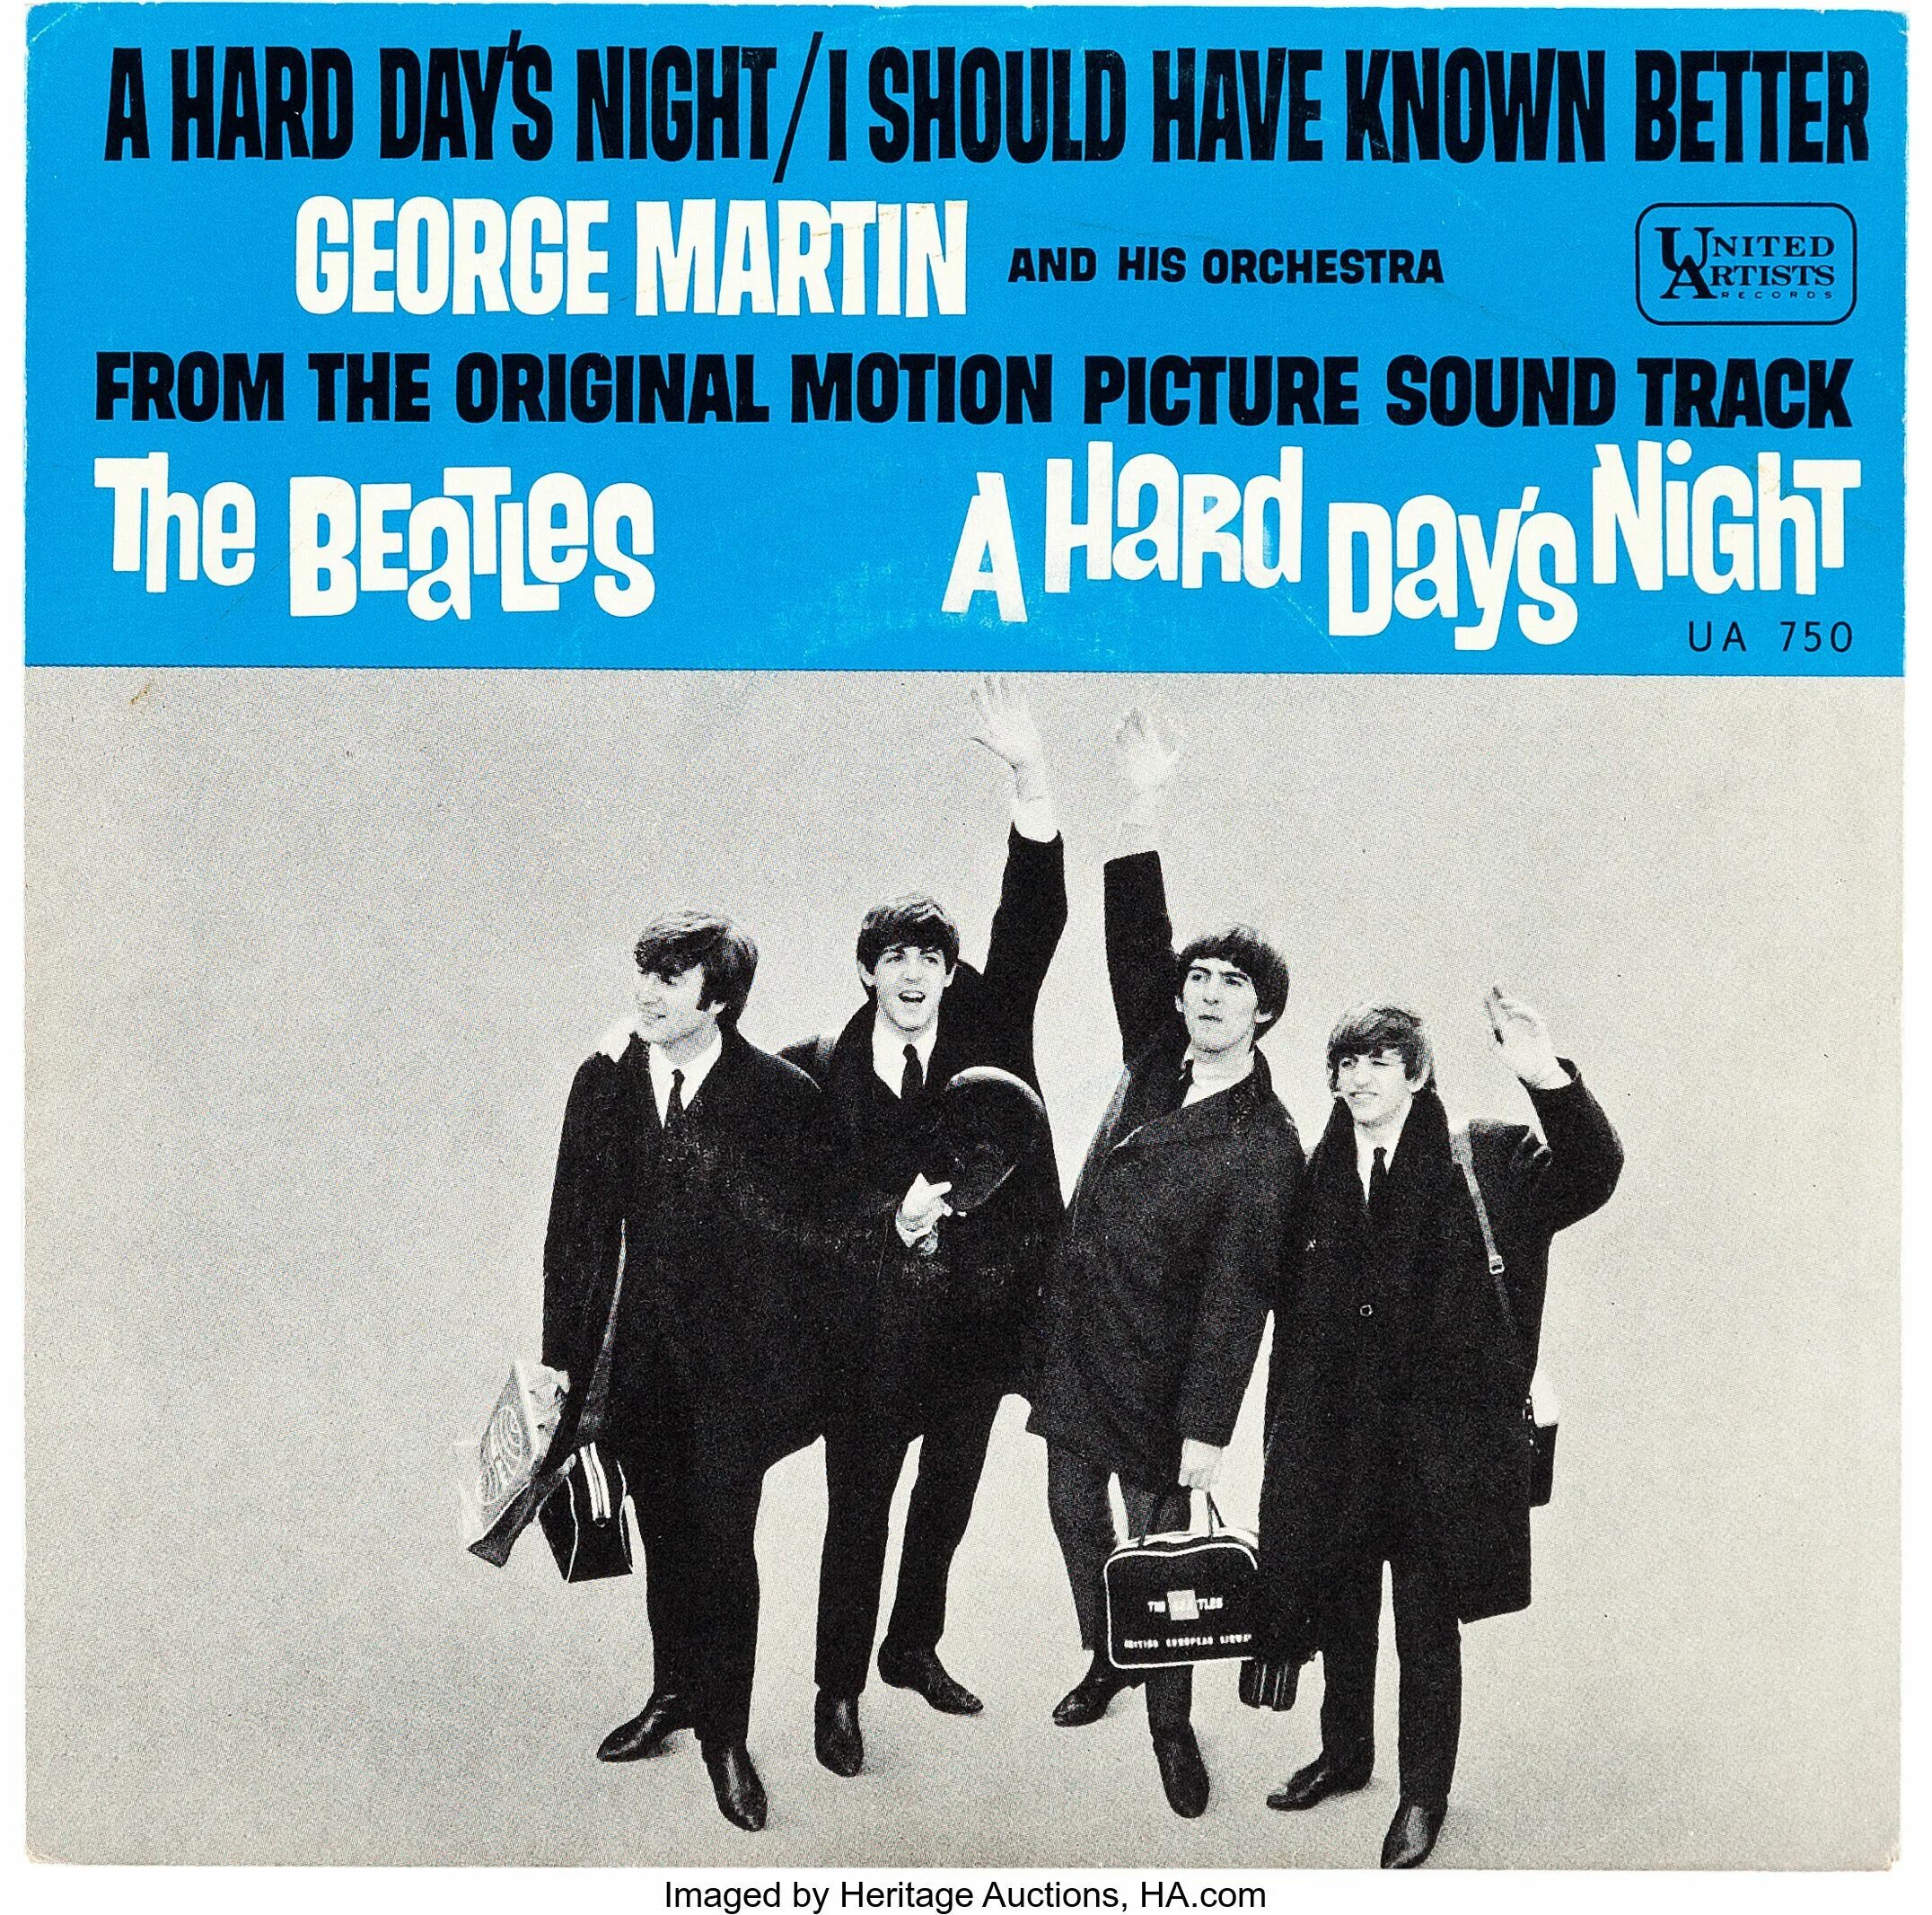 The Beatles a hard Day's Night 1964. Битлз hard Days Night альбом. The Beatles a hard Day's Night 1964 альбом. The beatles a hard day s night